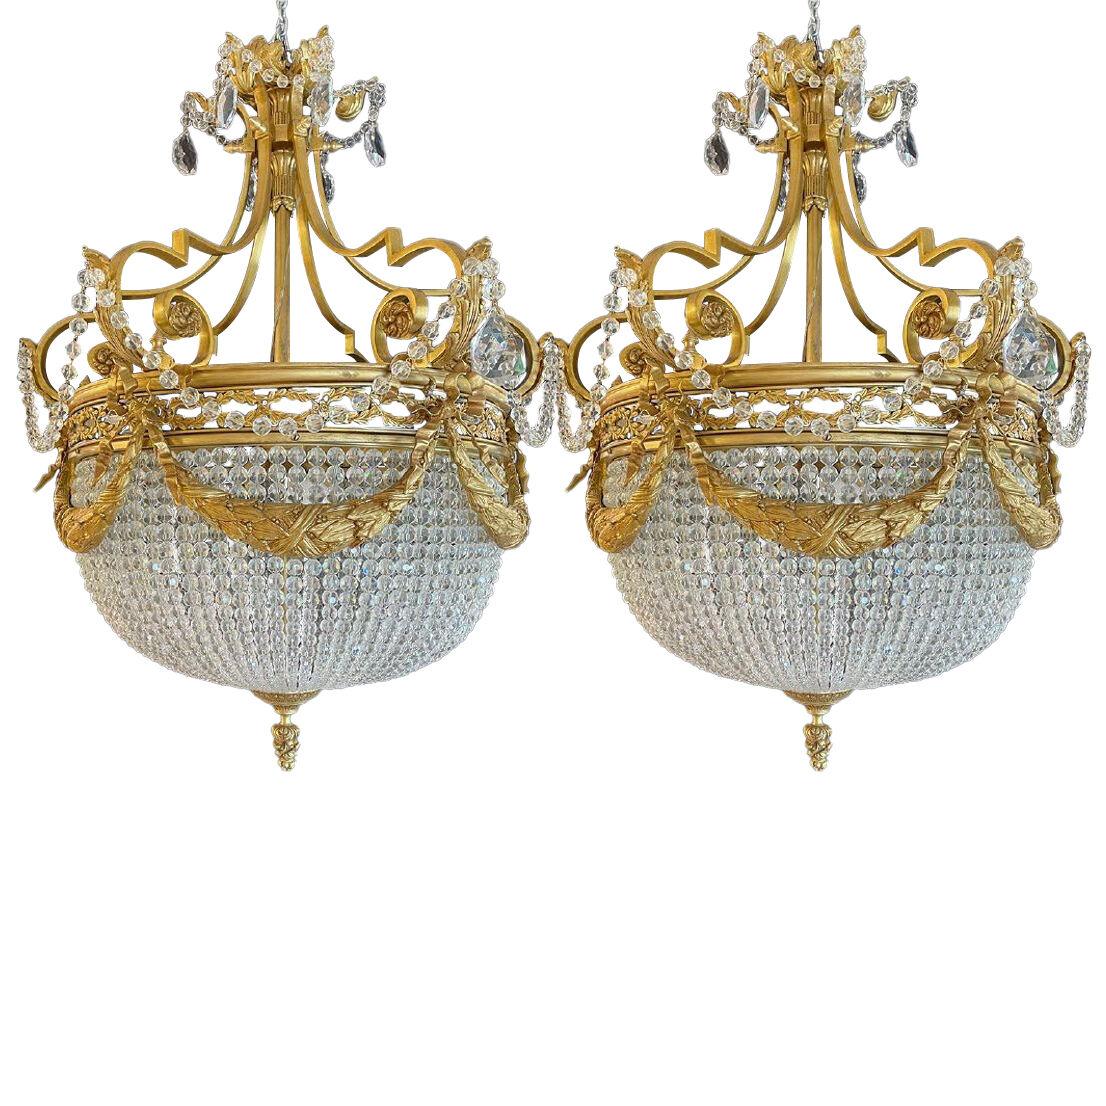 A Pair of Gilt Bronze Louis XVI Style Ballroom Chandeliers, Crystal, Rewired